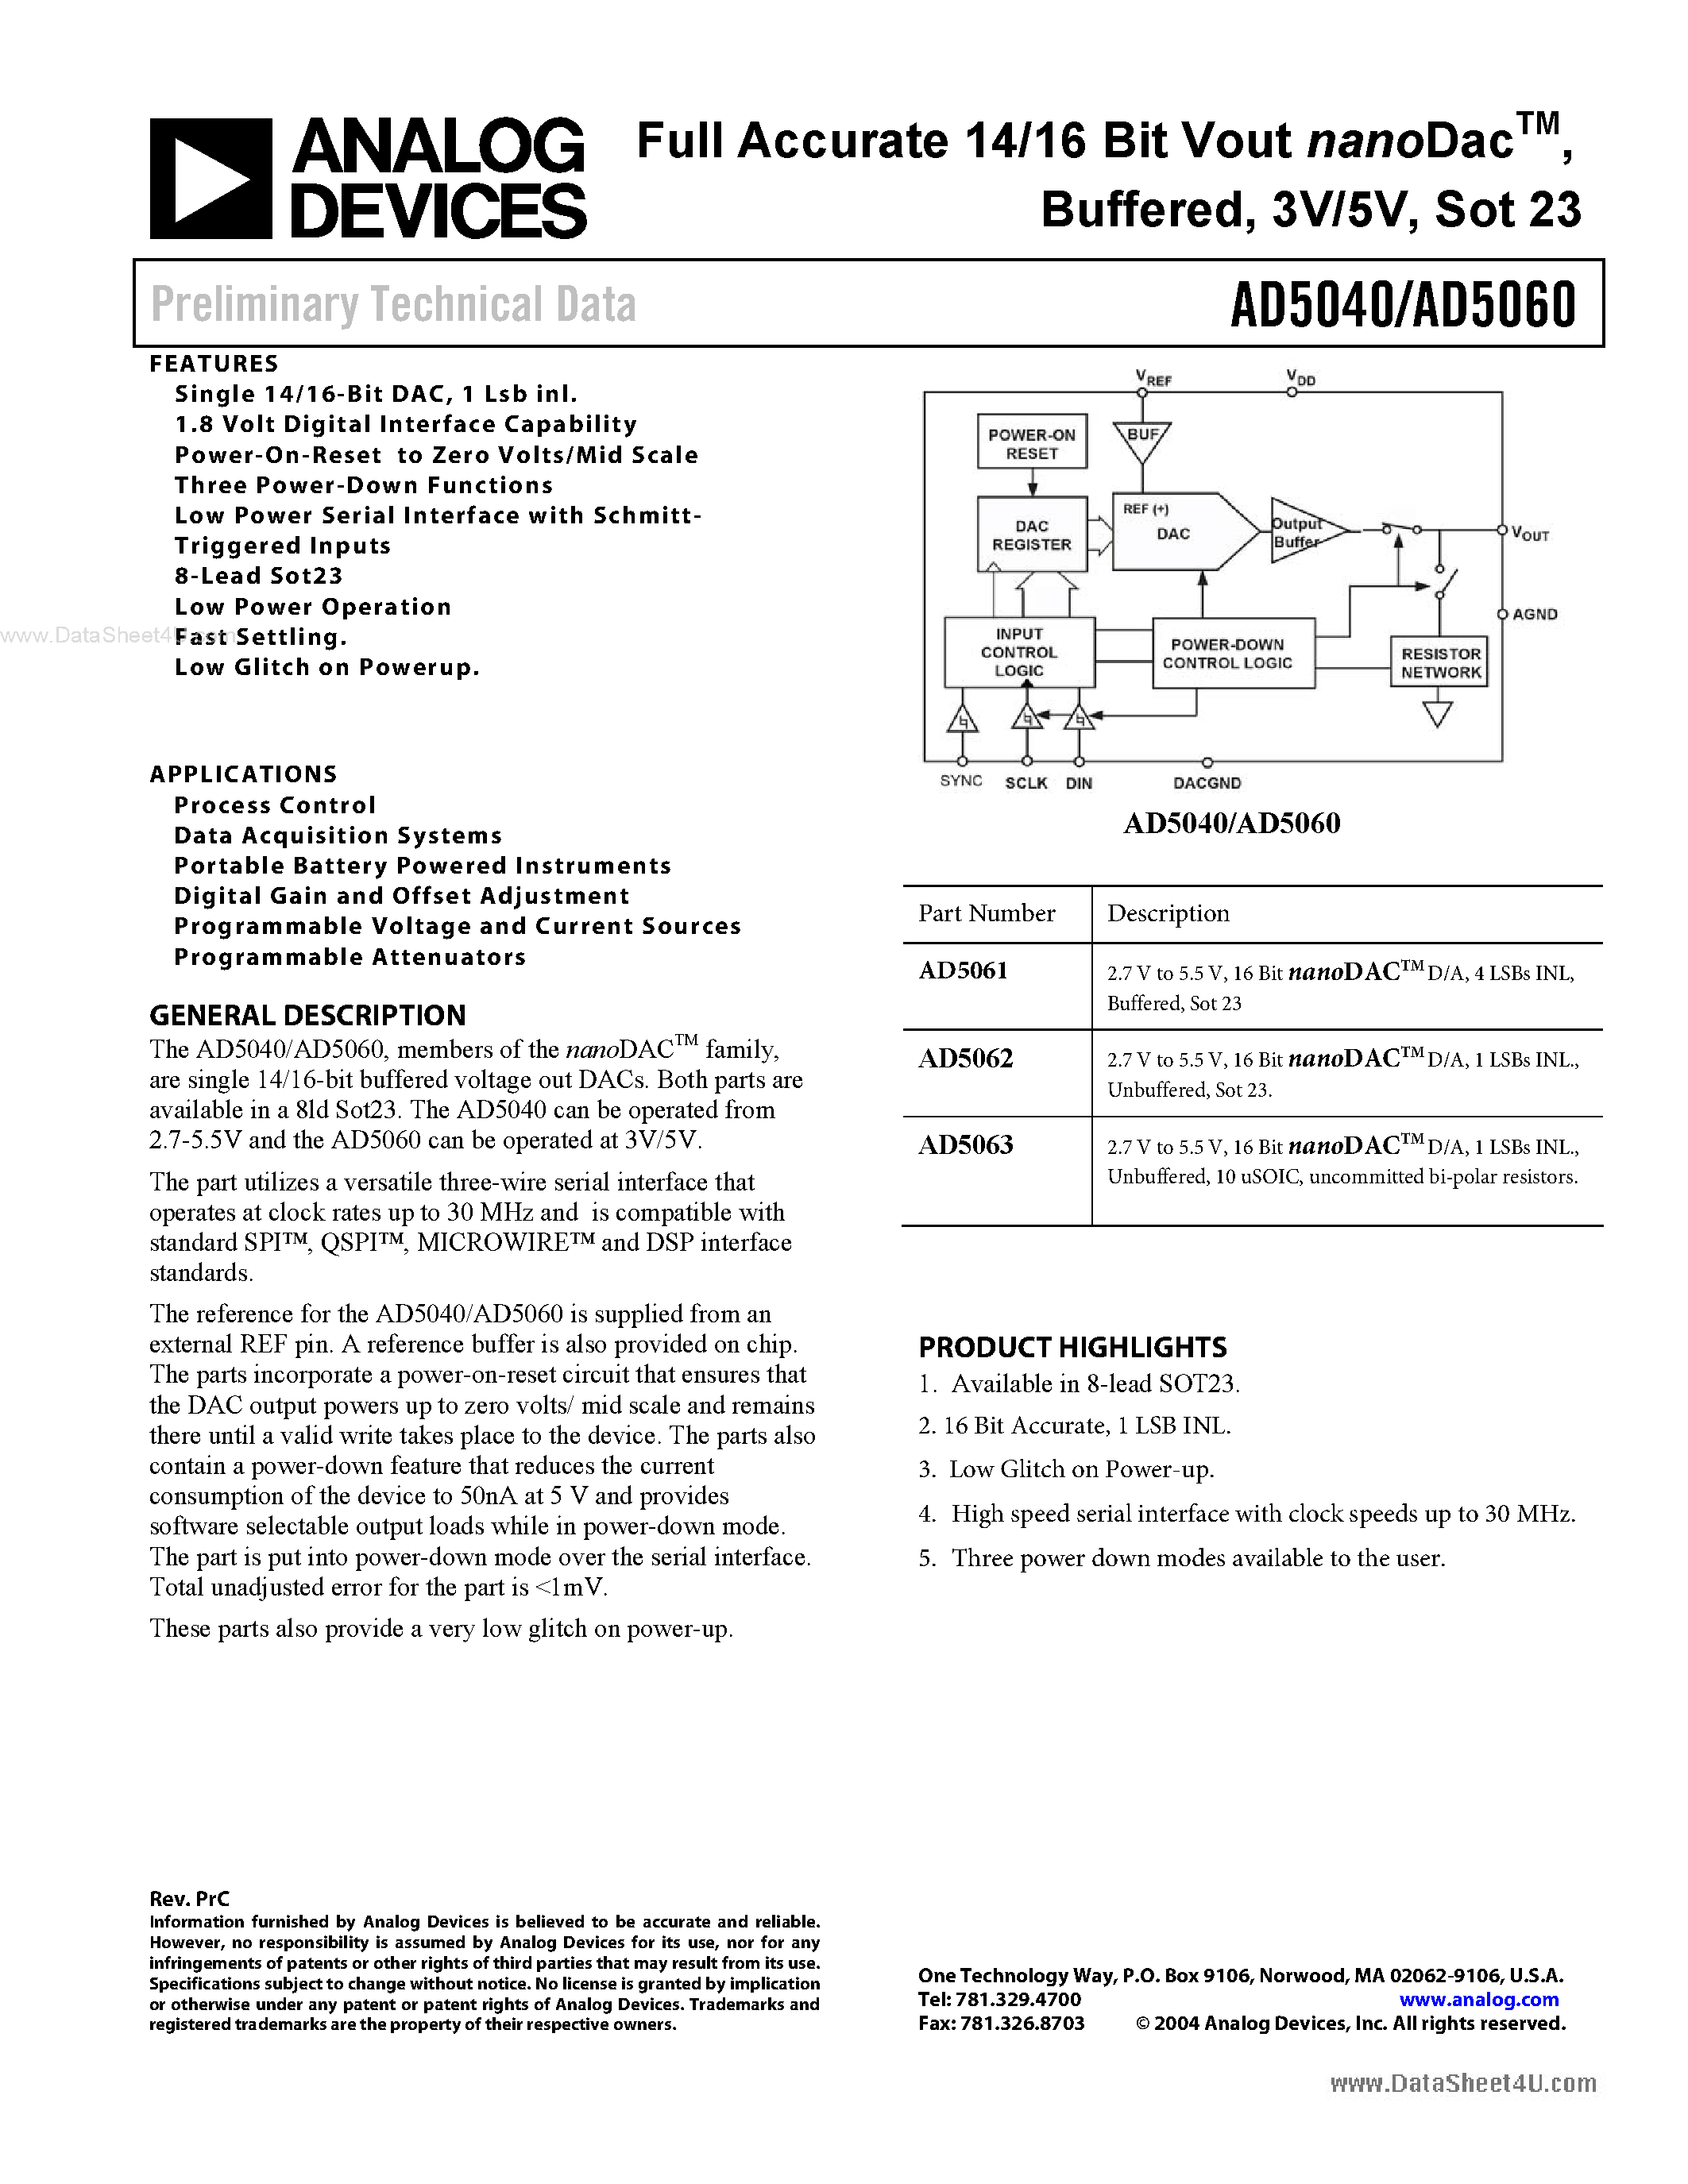 Datasheet AD5040 - (AD5040 / AD5060) Full Accurate 14/16 Bit Vout nanoDac Buffered page 1